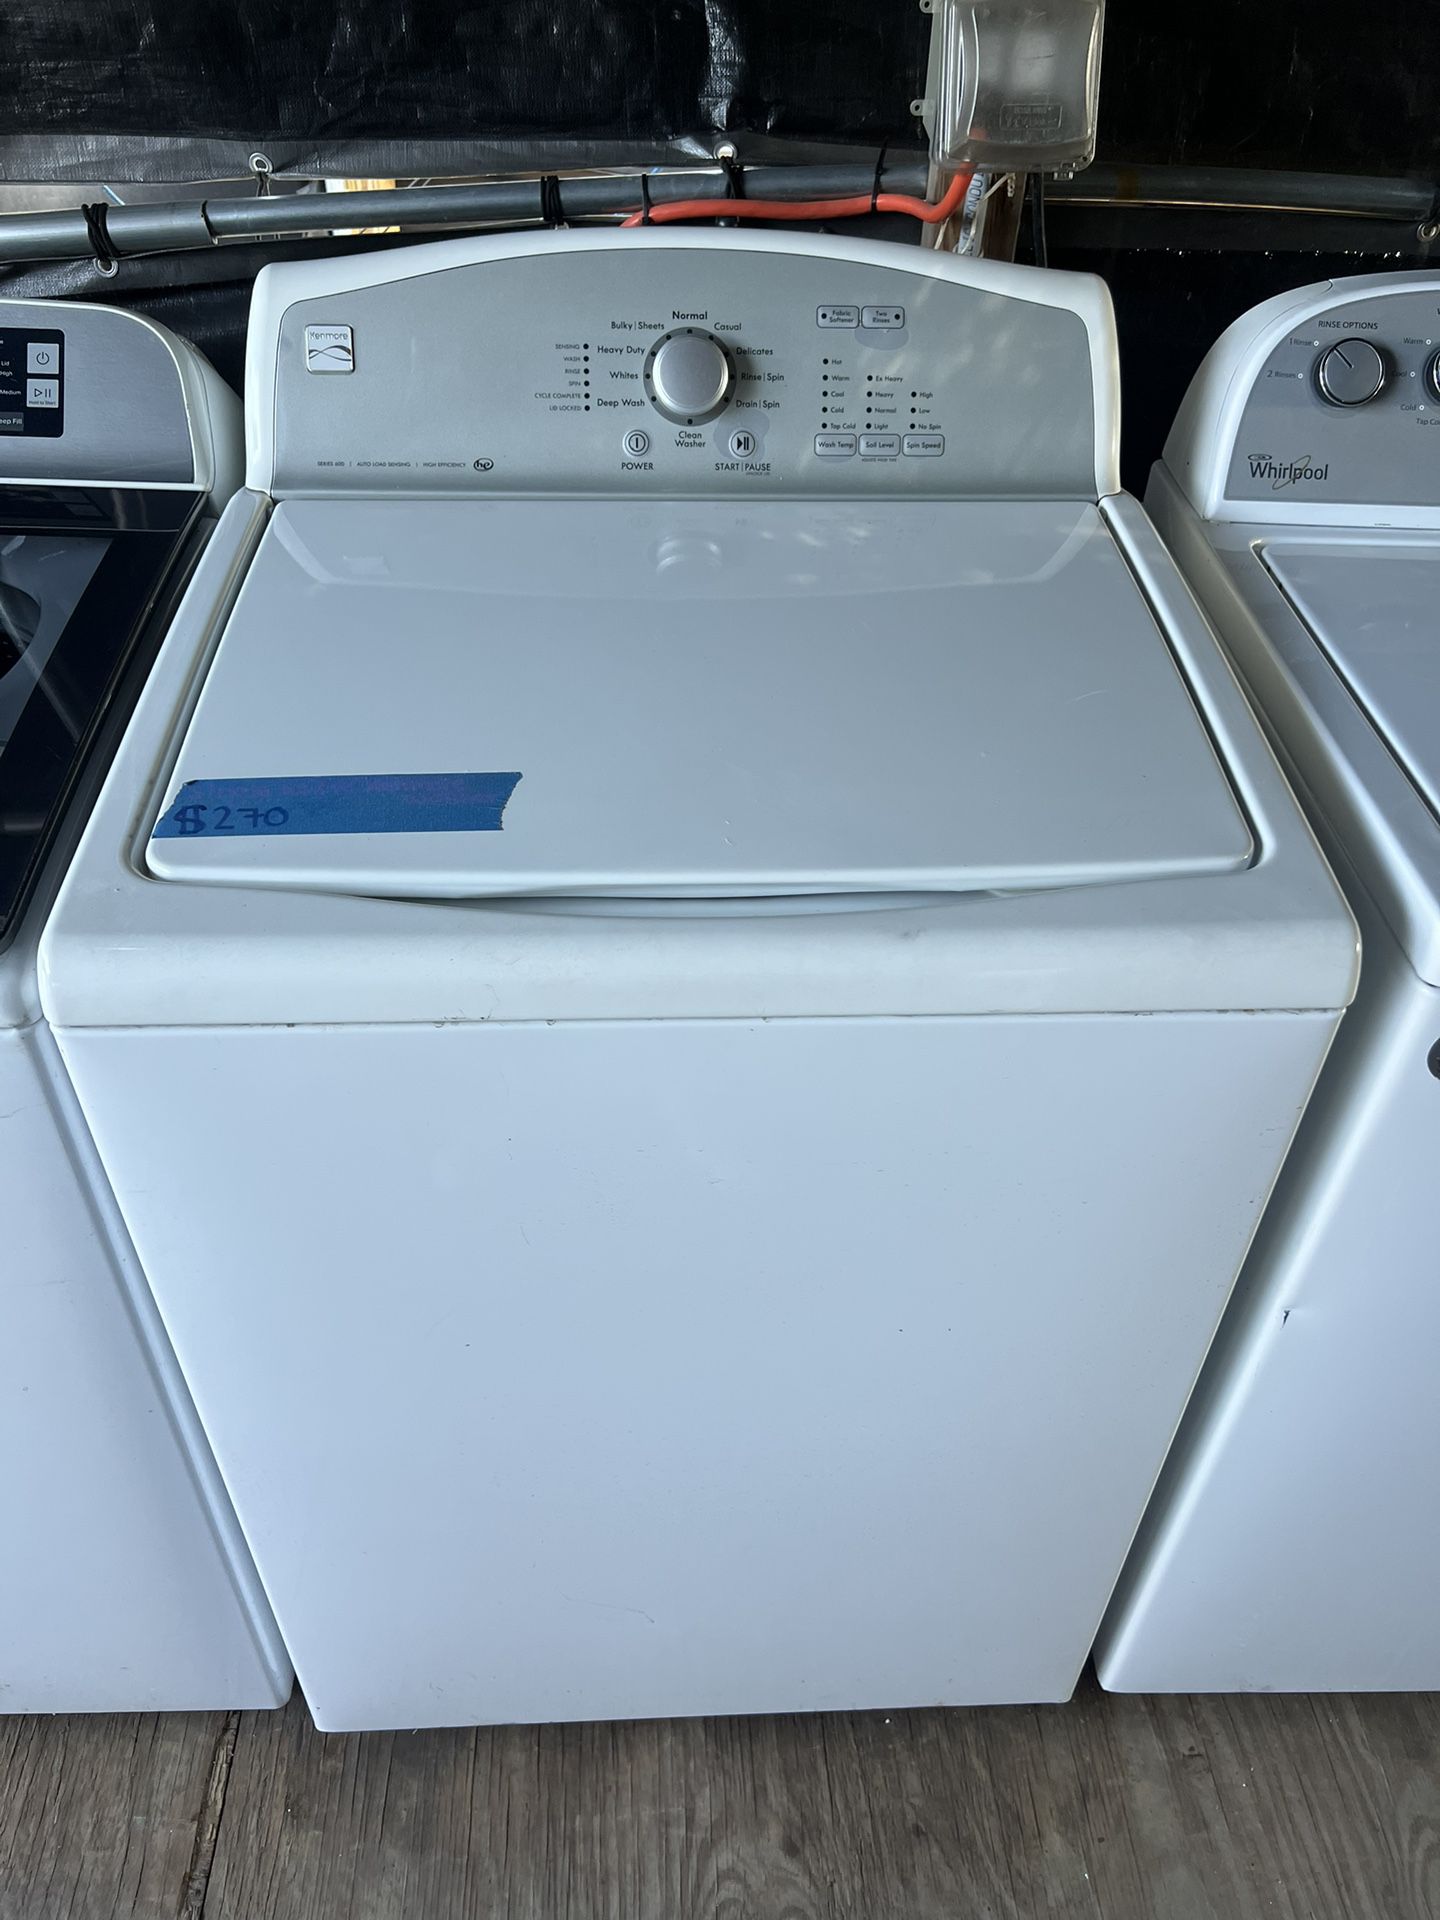 Kenmore Large Capacity Washer 60 day warranty/ Located at:📍5415 Carmack Rd Tampa Fl 33610📍